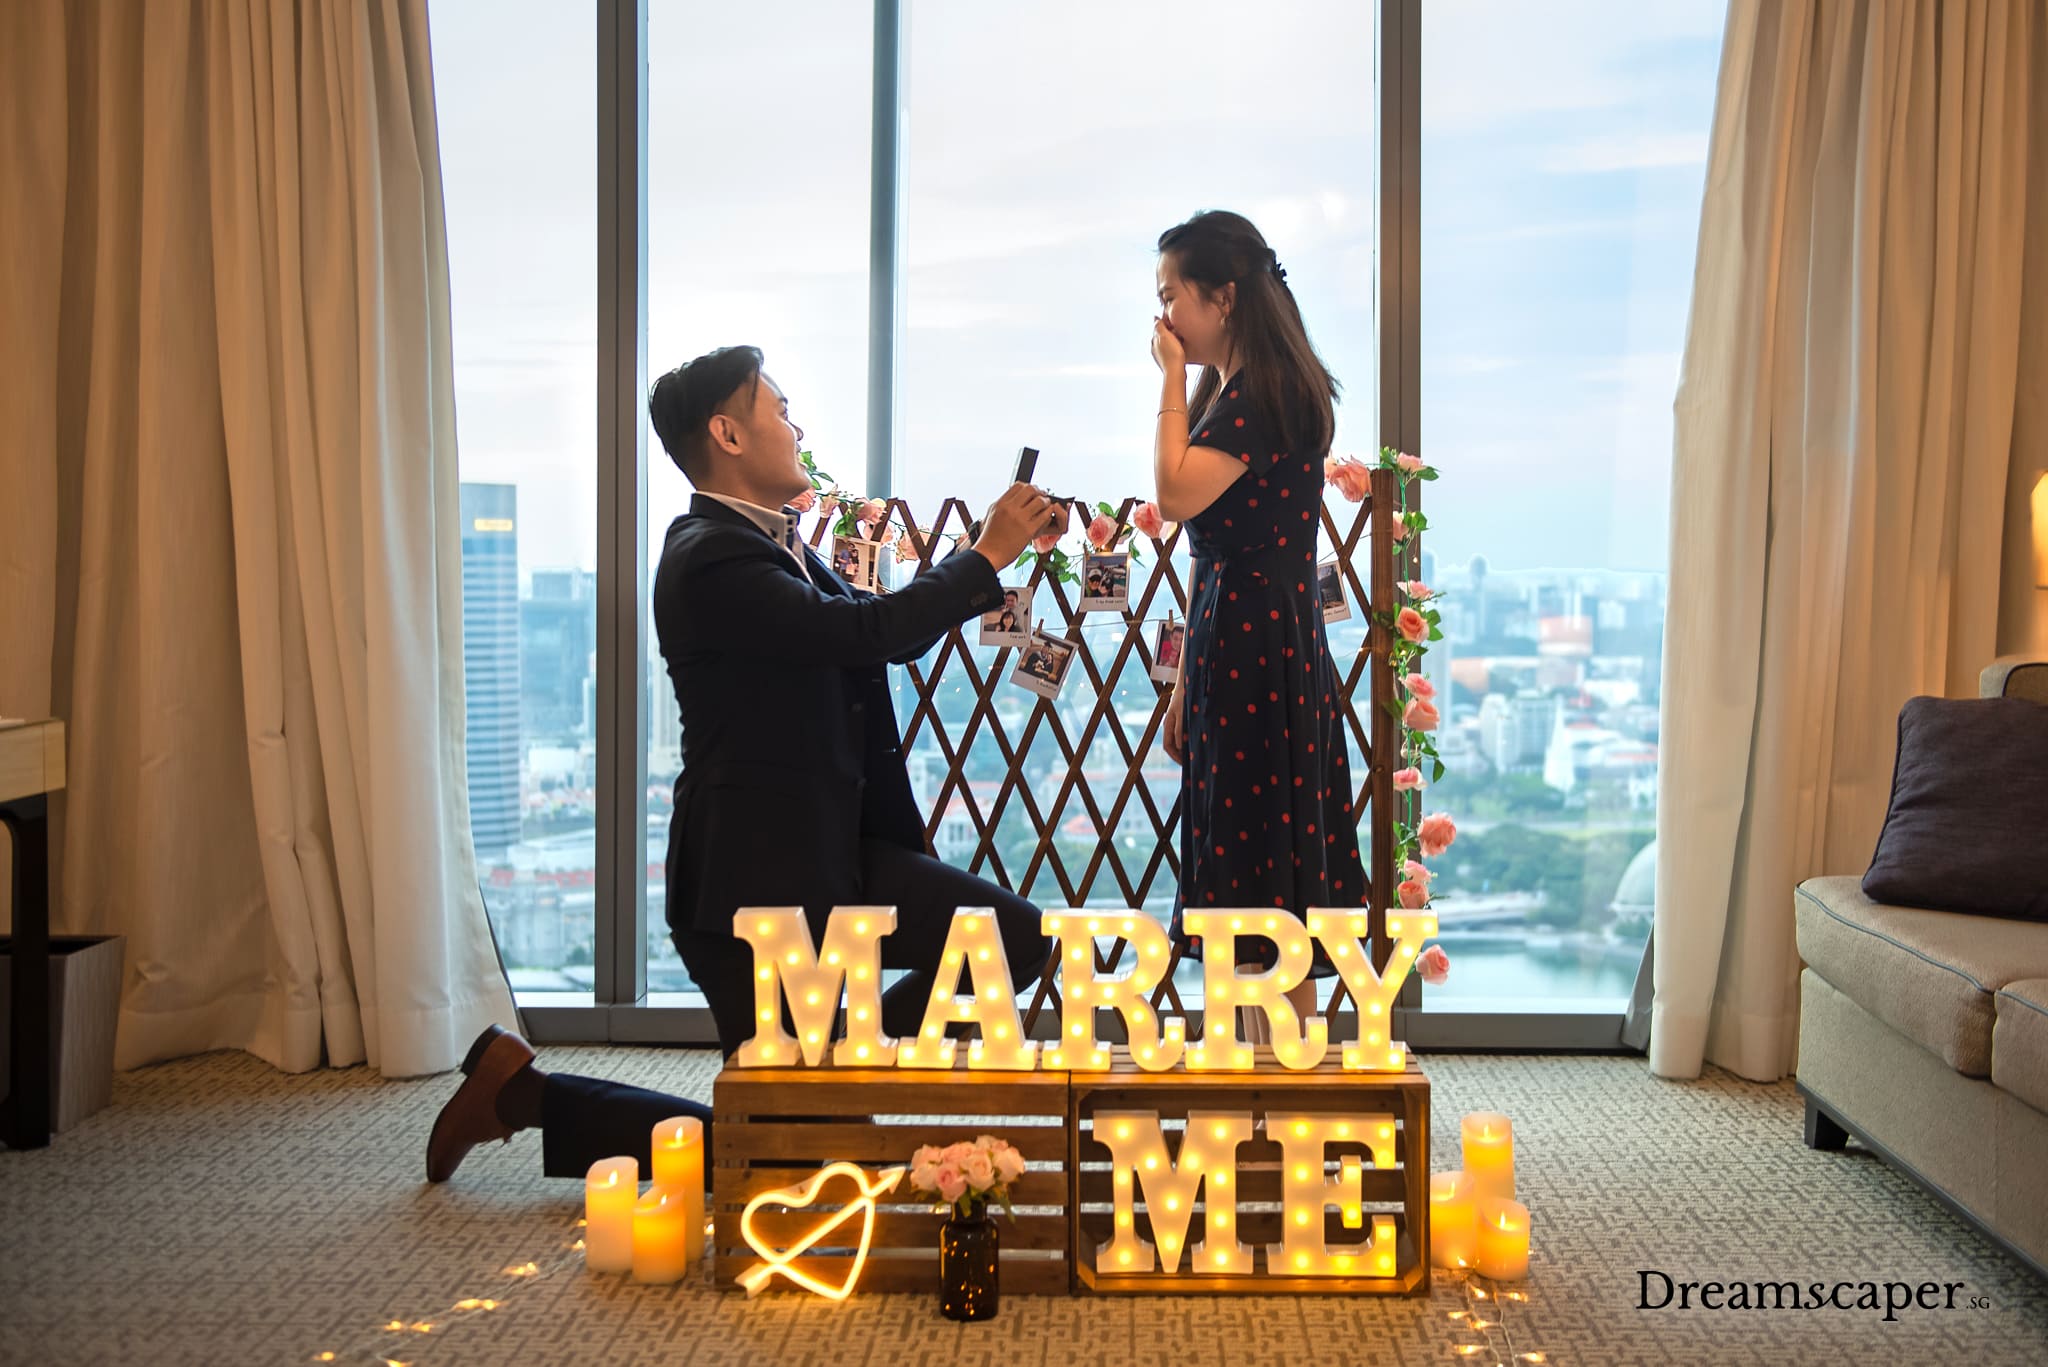 Our Client Marriage Proposal in Singapore